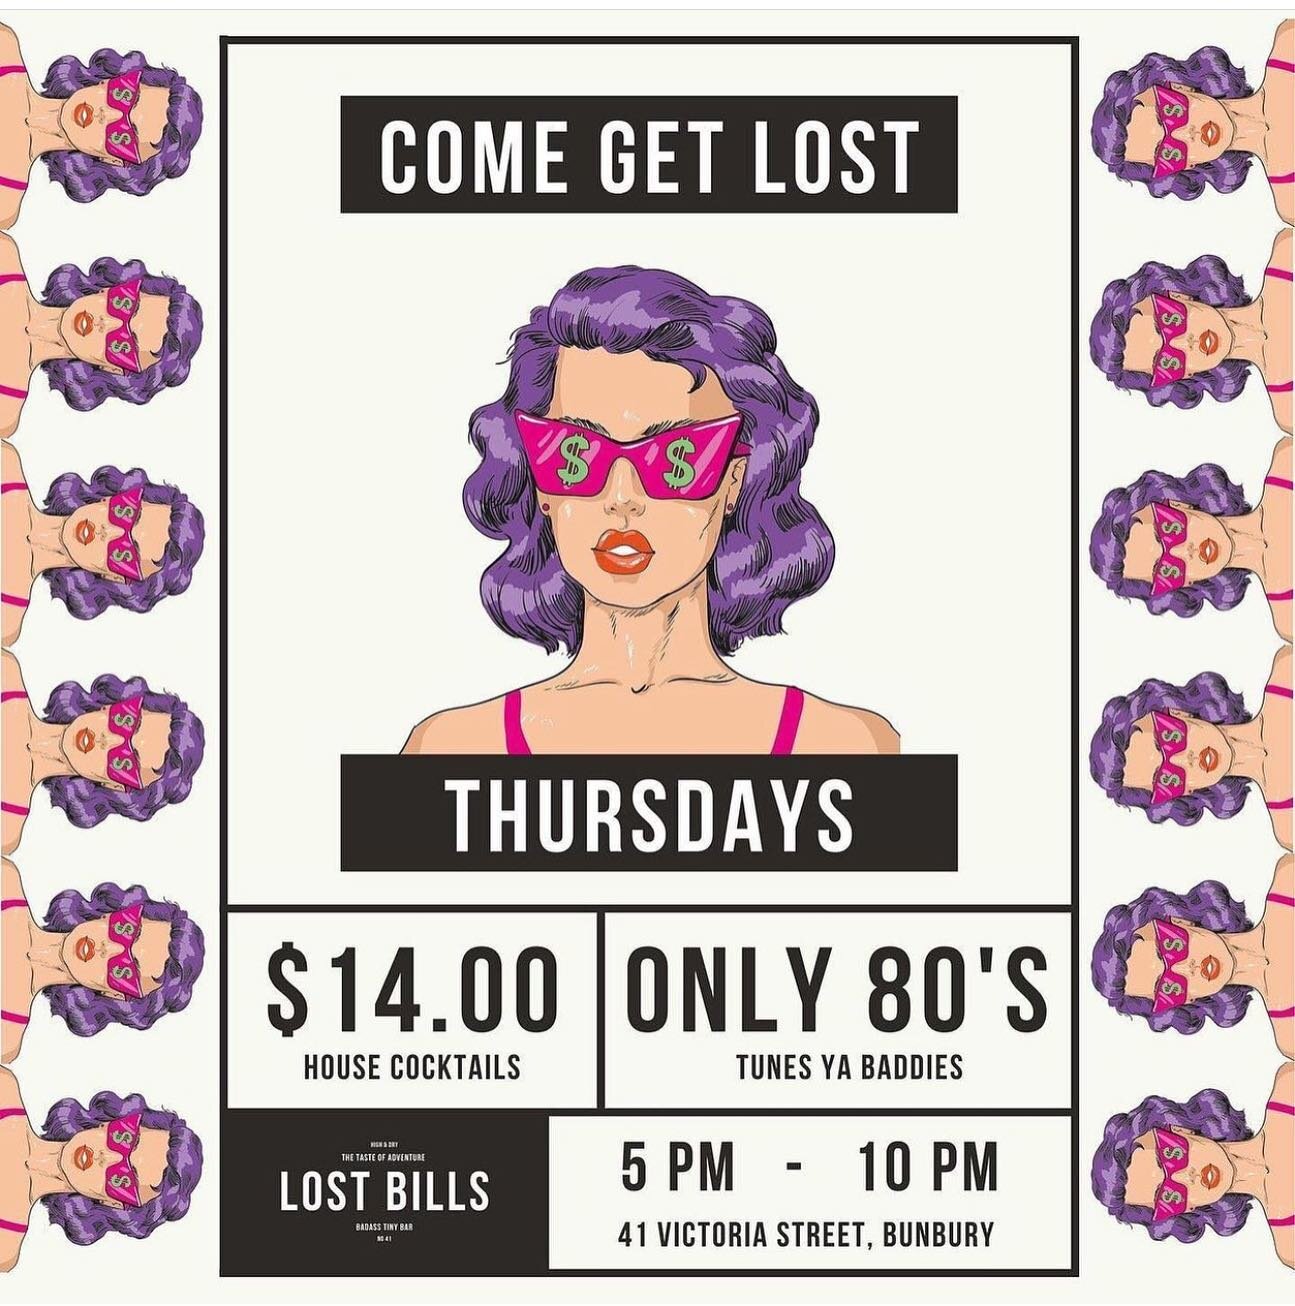 Time for some $14 house cocktails &amp; 80&rsquo;s bangers? 
Doors open from 5pm- 10pm 

Xoxo